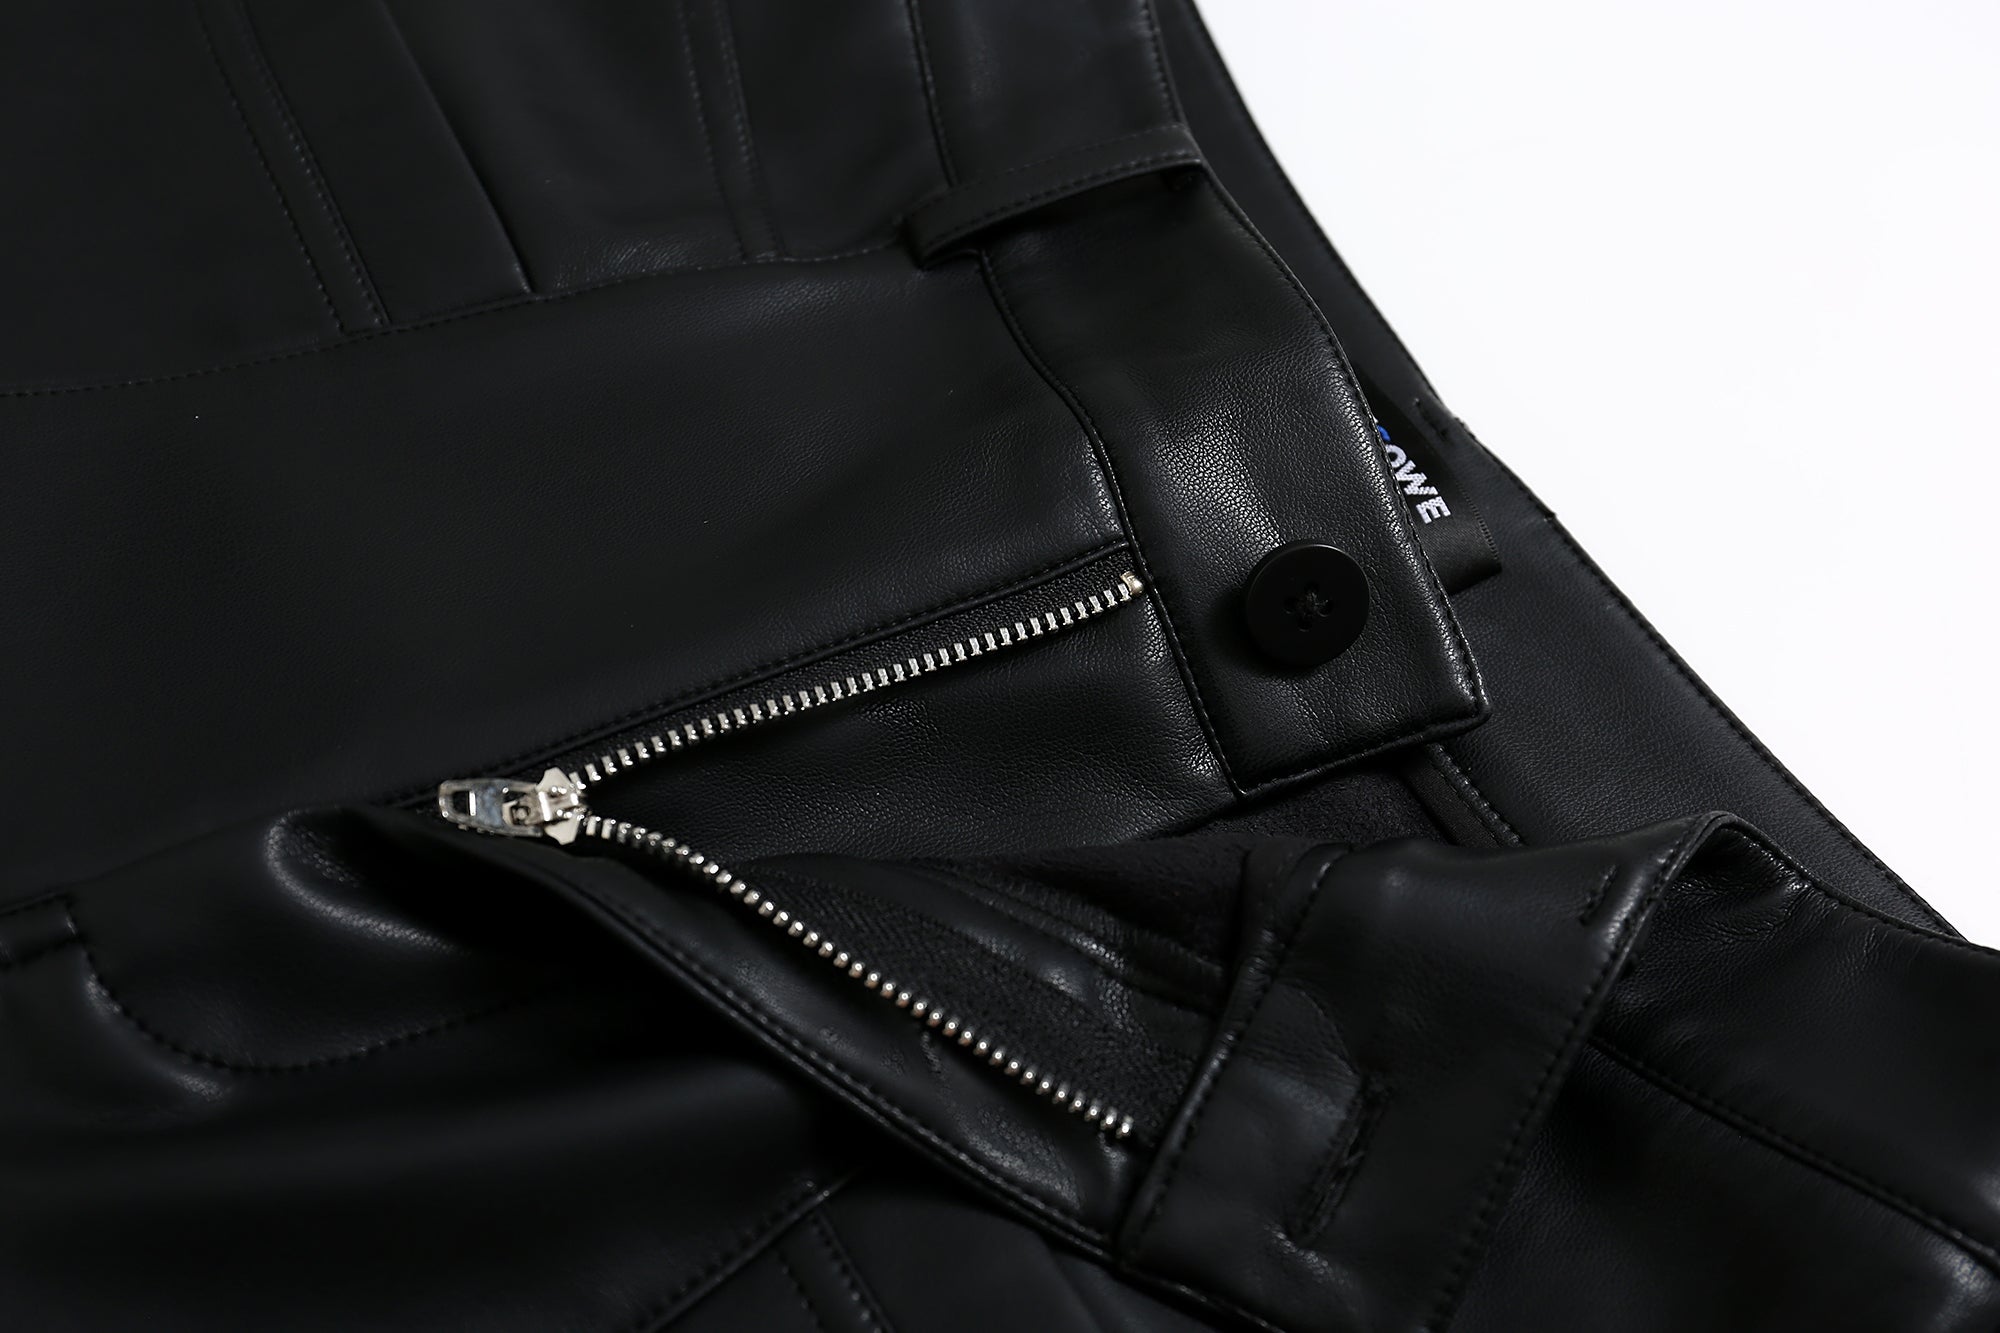 SOMESOWE Black Centre-seam cropped leather trousers | MADA IN CHINA